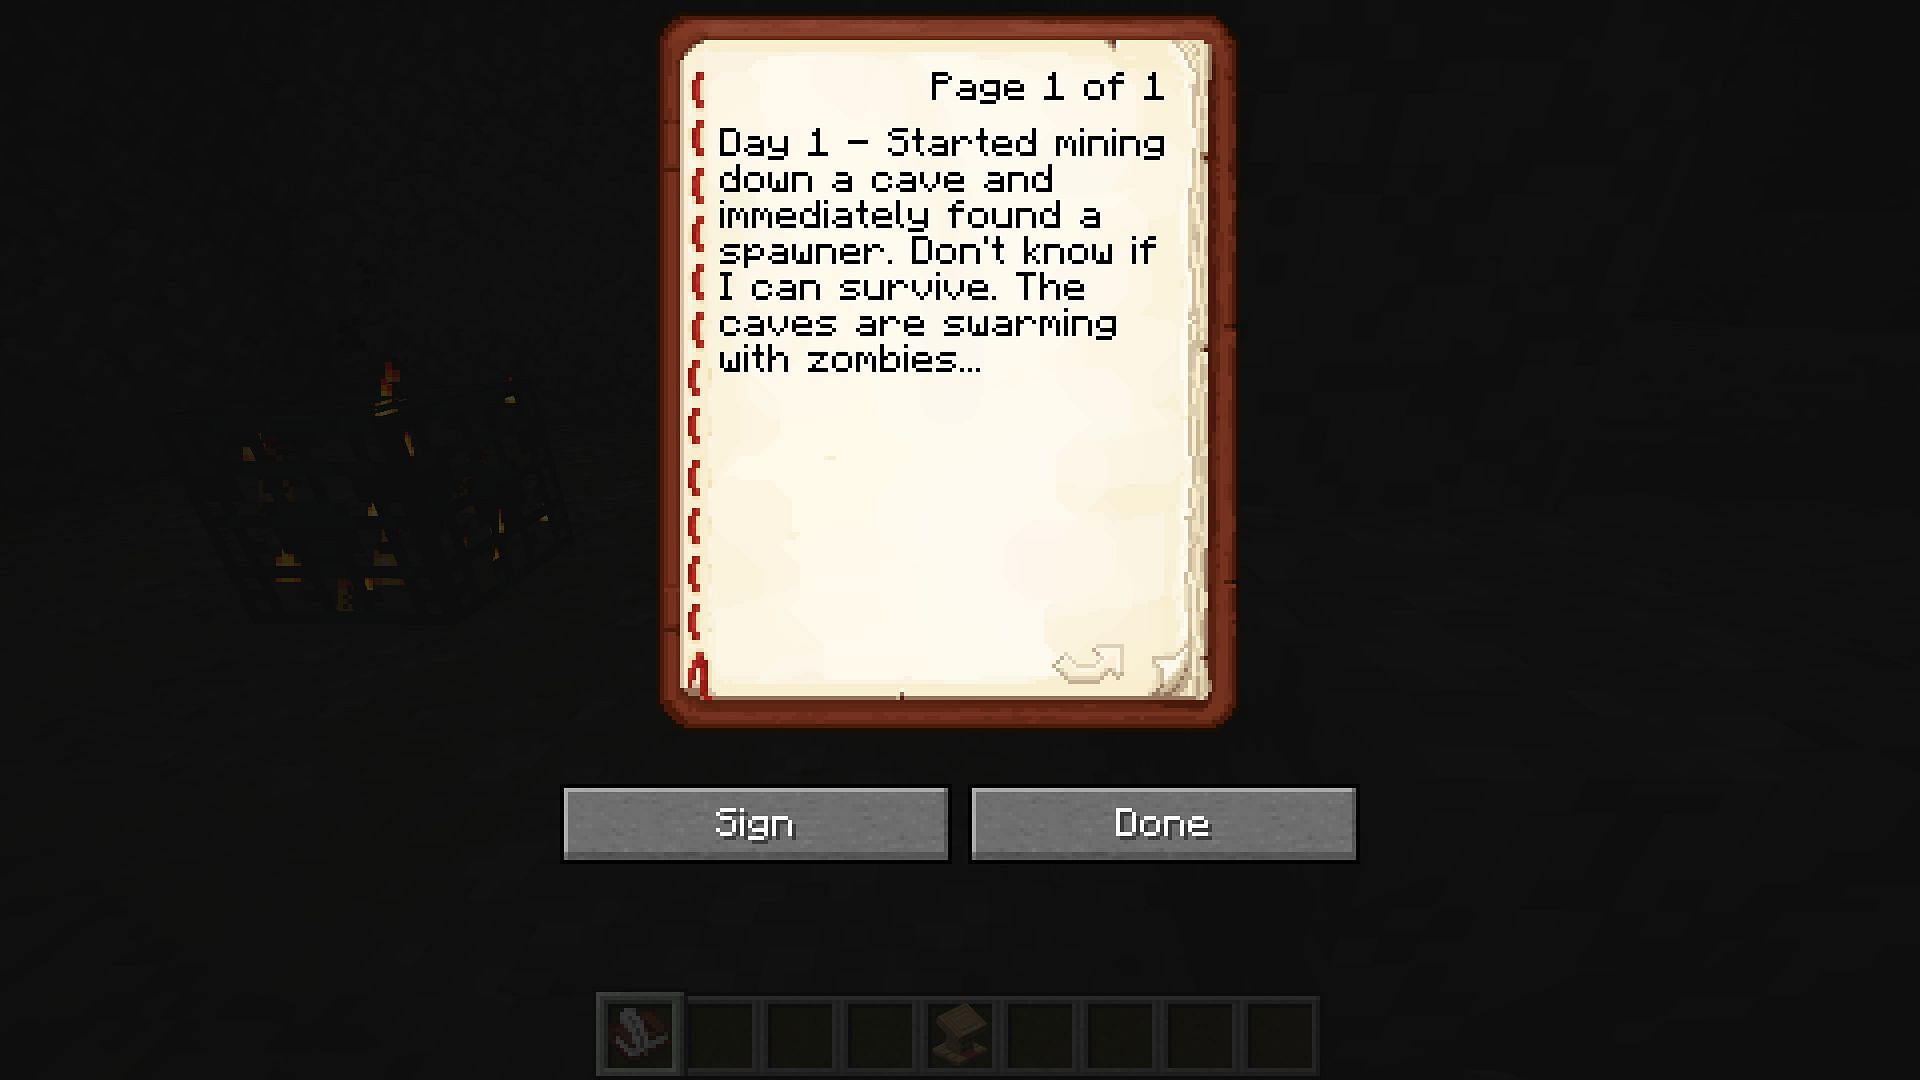 The book can be used to write (Image via Minecraft 1.19)